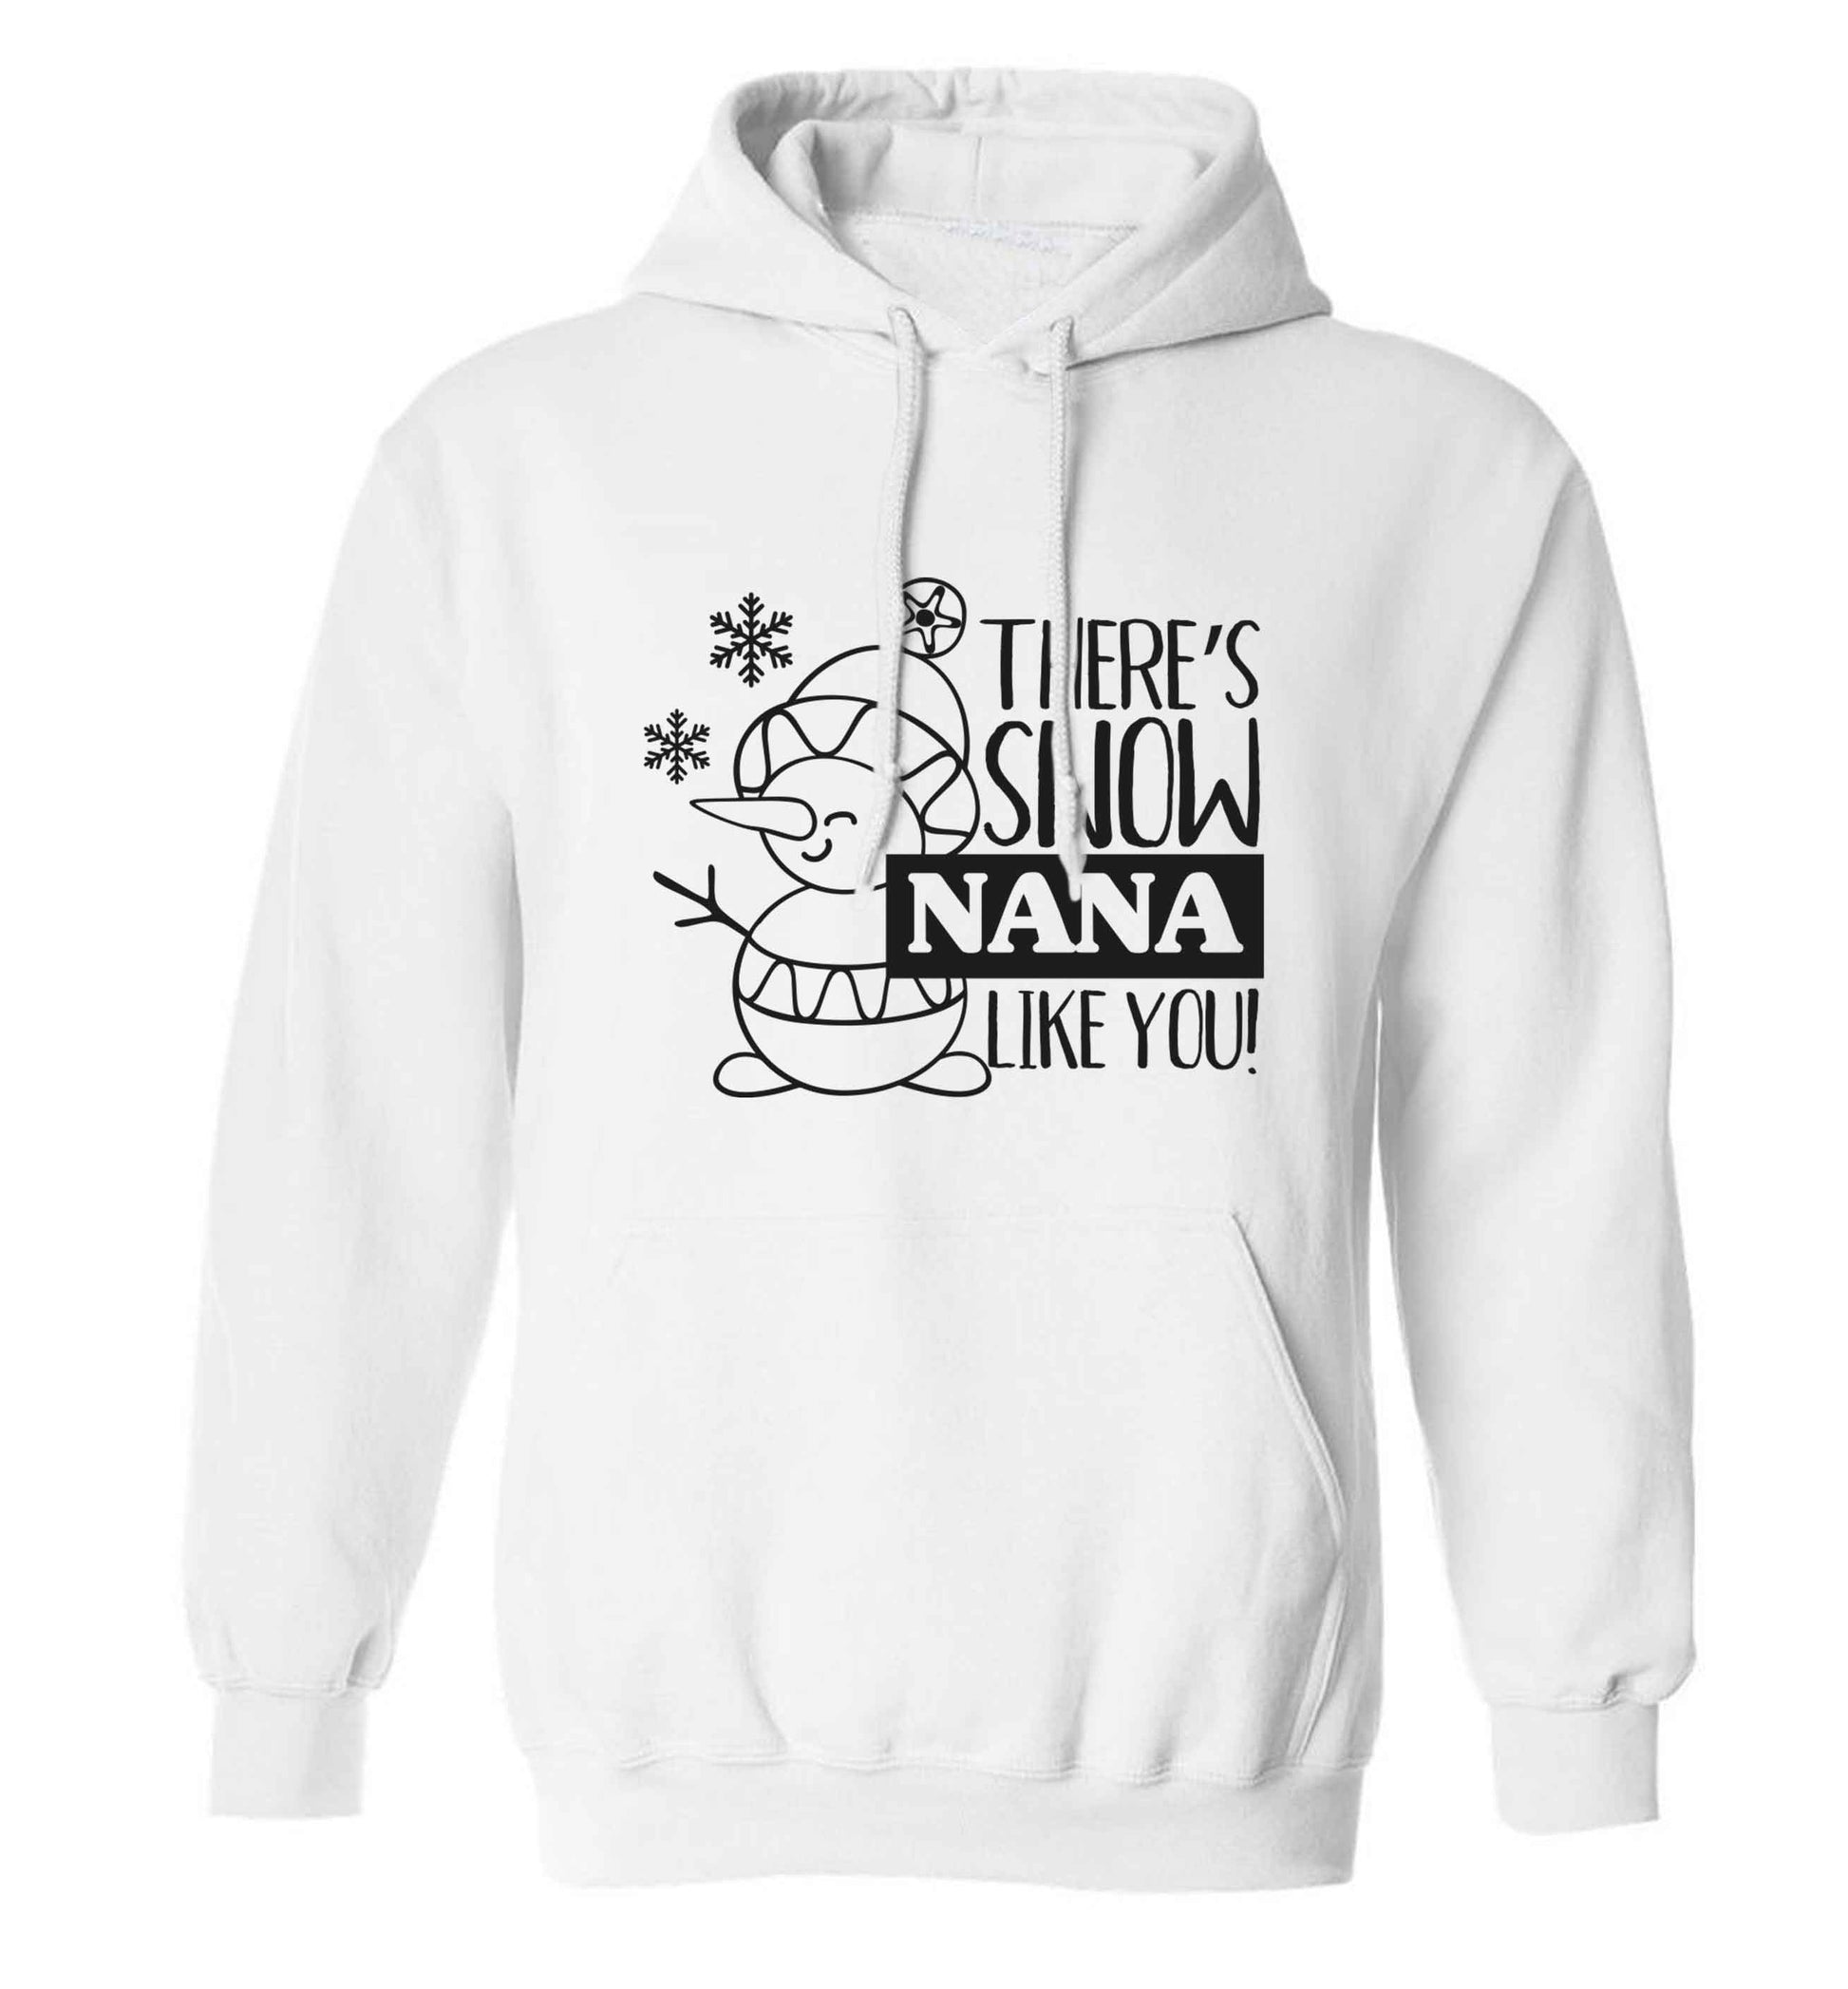 There's snow nana like you adults unisex white hoodie 2XL